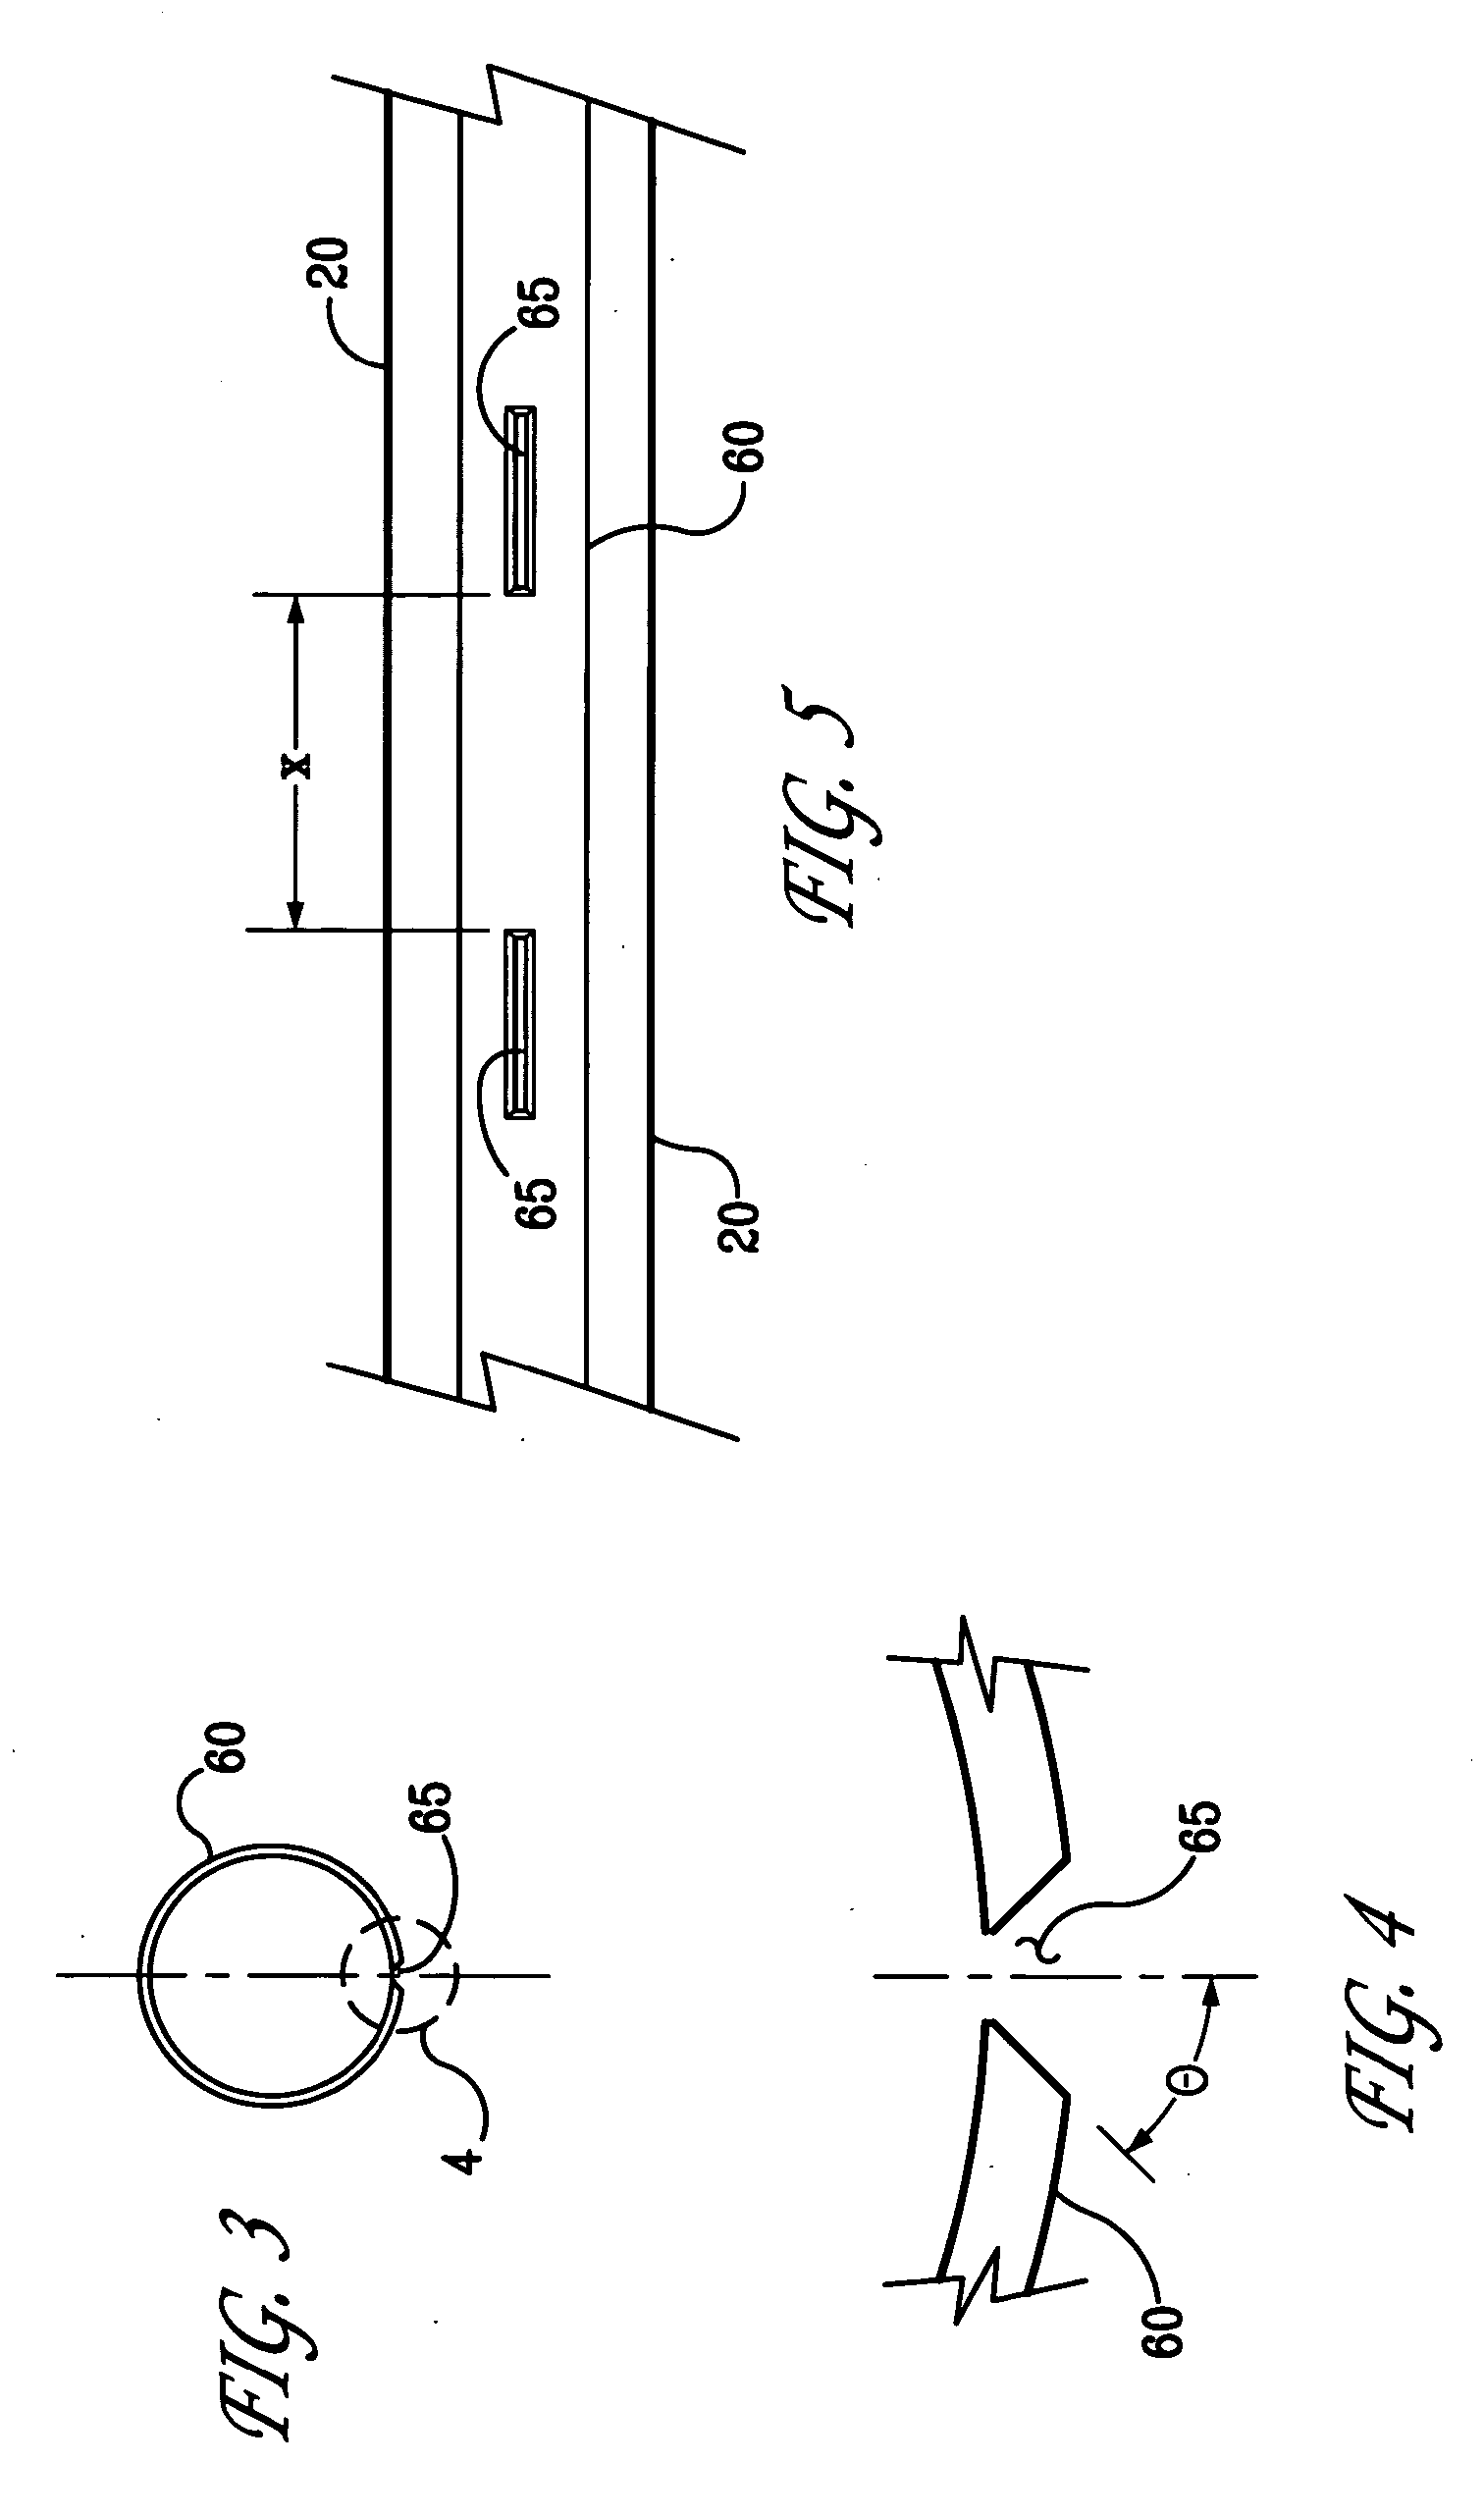 Apparatus and process for surface treatment of substrate using an activated reactive gas